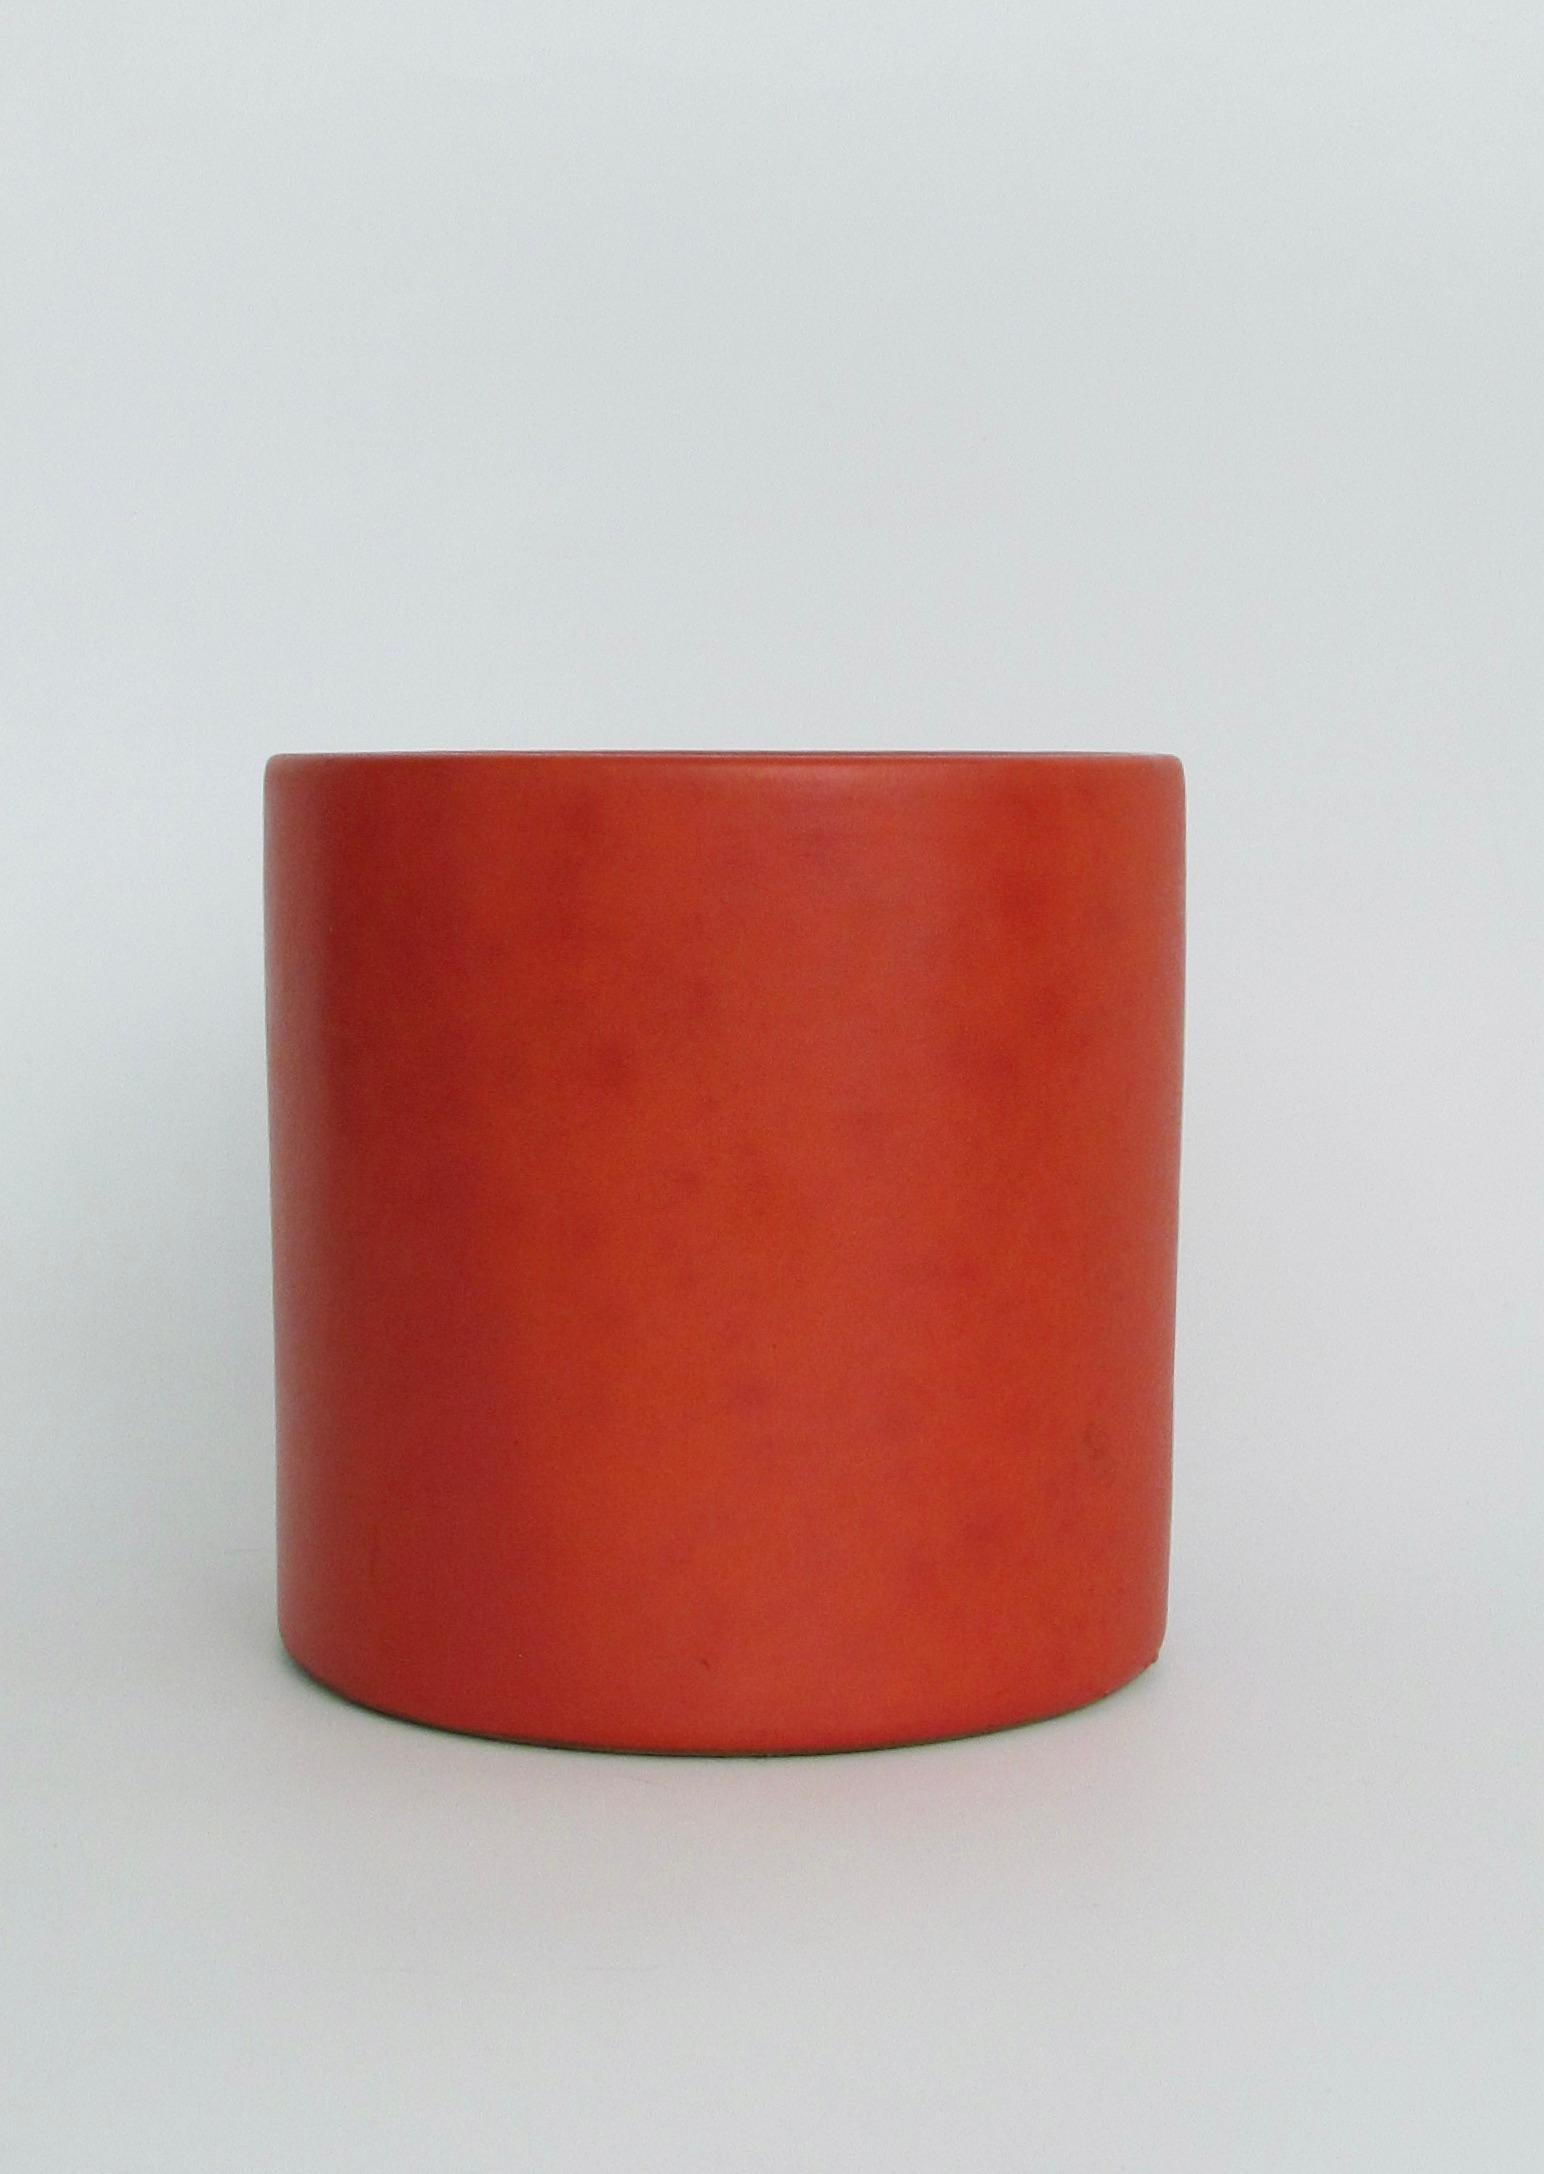 Early Lagardo Tackett for Architectural Pottery Matte Red Glazed Planter Pot In Good Condition For Sale In Ferndale, MI